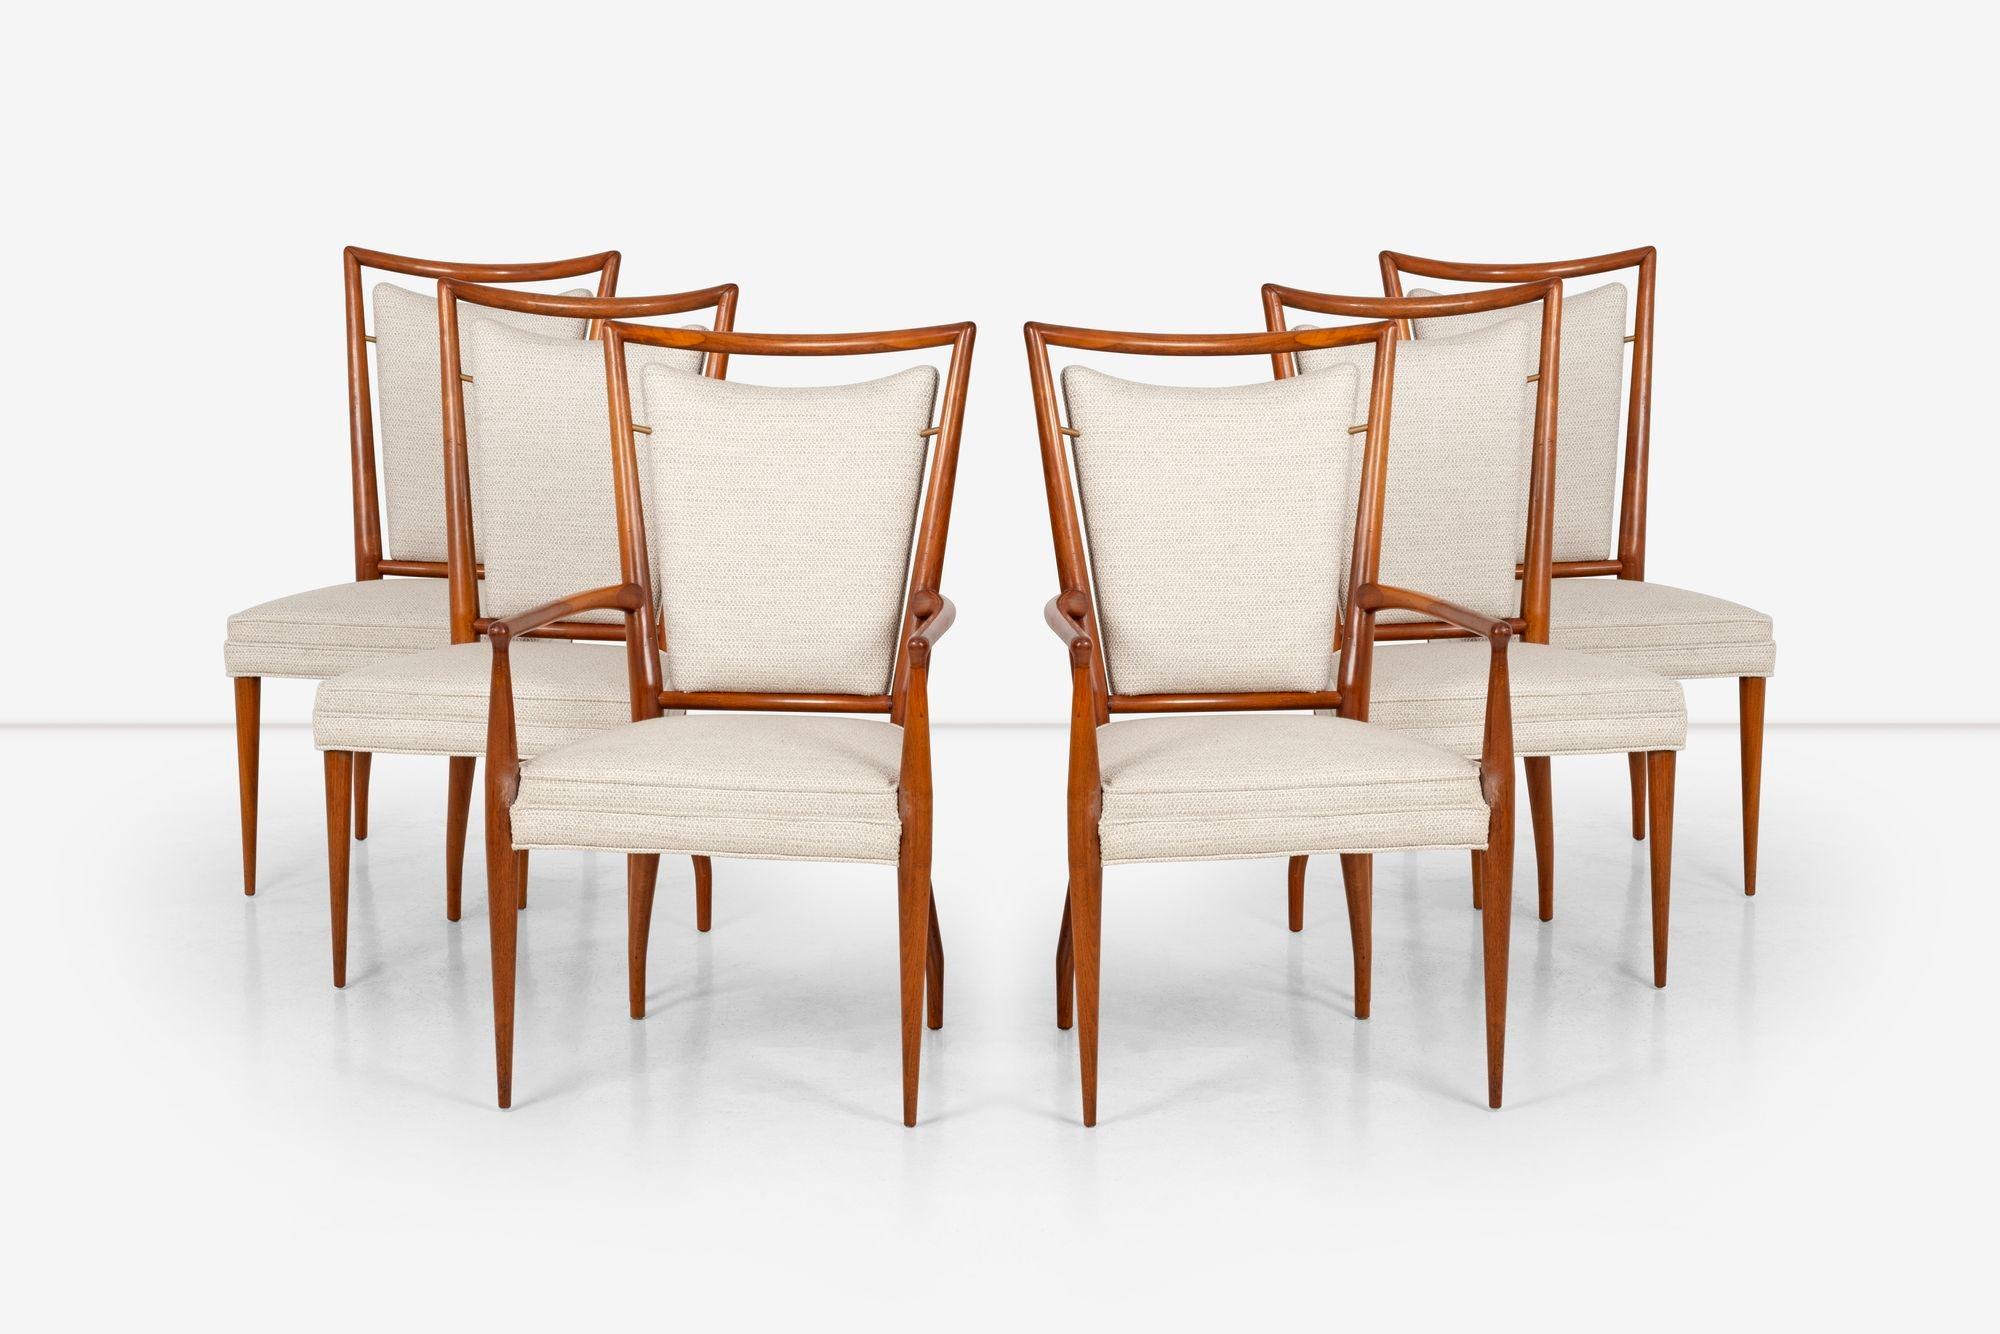 Pair of Six Dining Chairs by J. Stuart Clingman for Widdicomb. The chairs are made of solid mahogany wood with a lacquer finish and feature brass spacer details. They have been reupholstered with cotton-poly fabric.
J. Stuart Clingman served as the